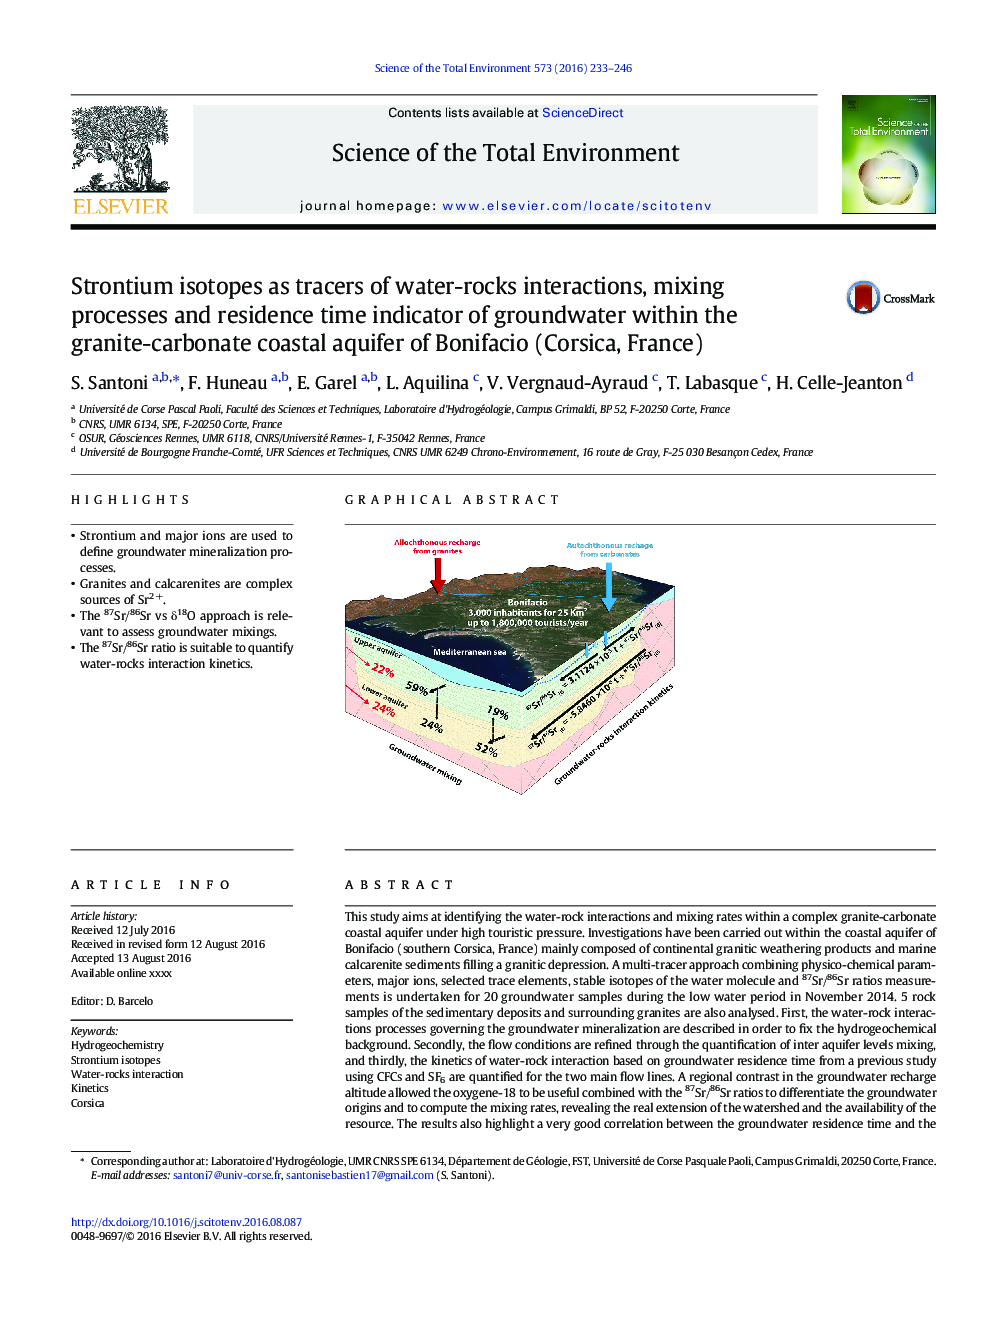 Strontium isotopes as tracers of water-rocks interactions, mixing processes and residence time indicator of groundwater within the granite-carbonate coastal aquifer of Bonifacio (Corsica, France)